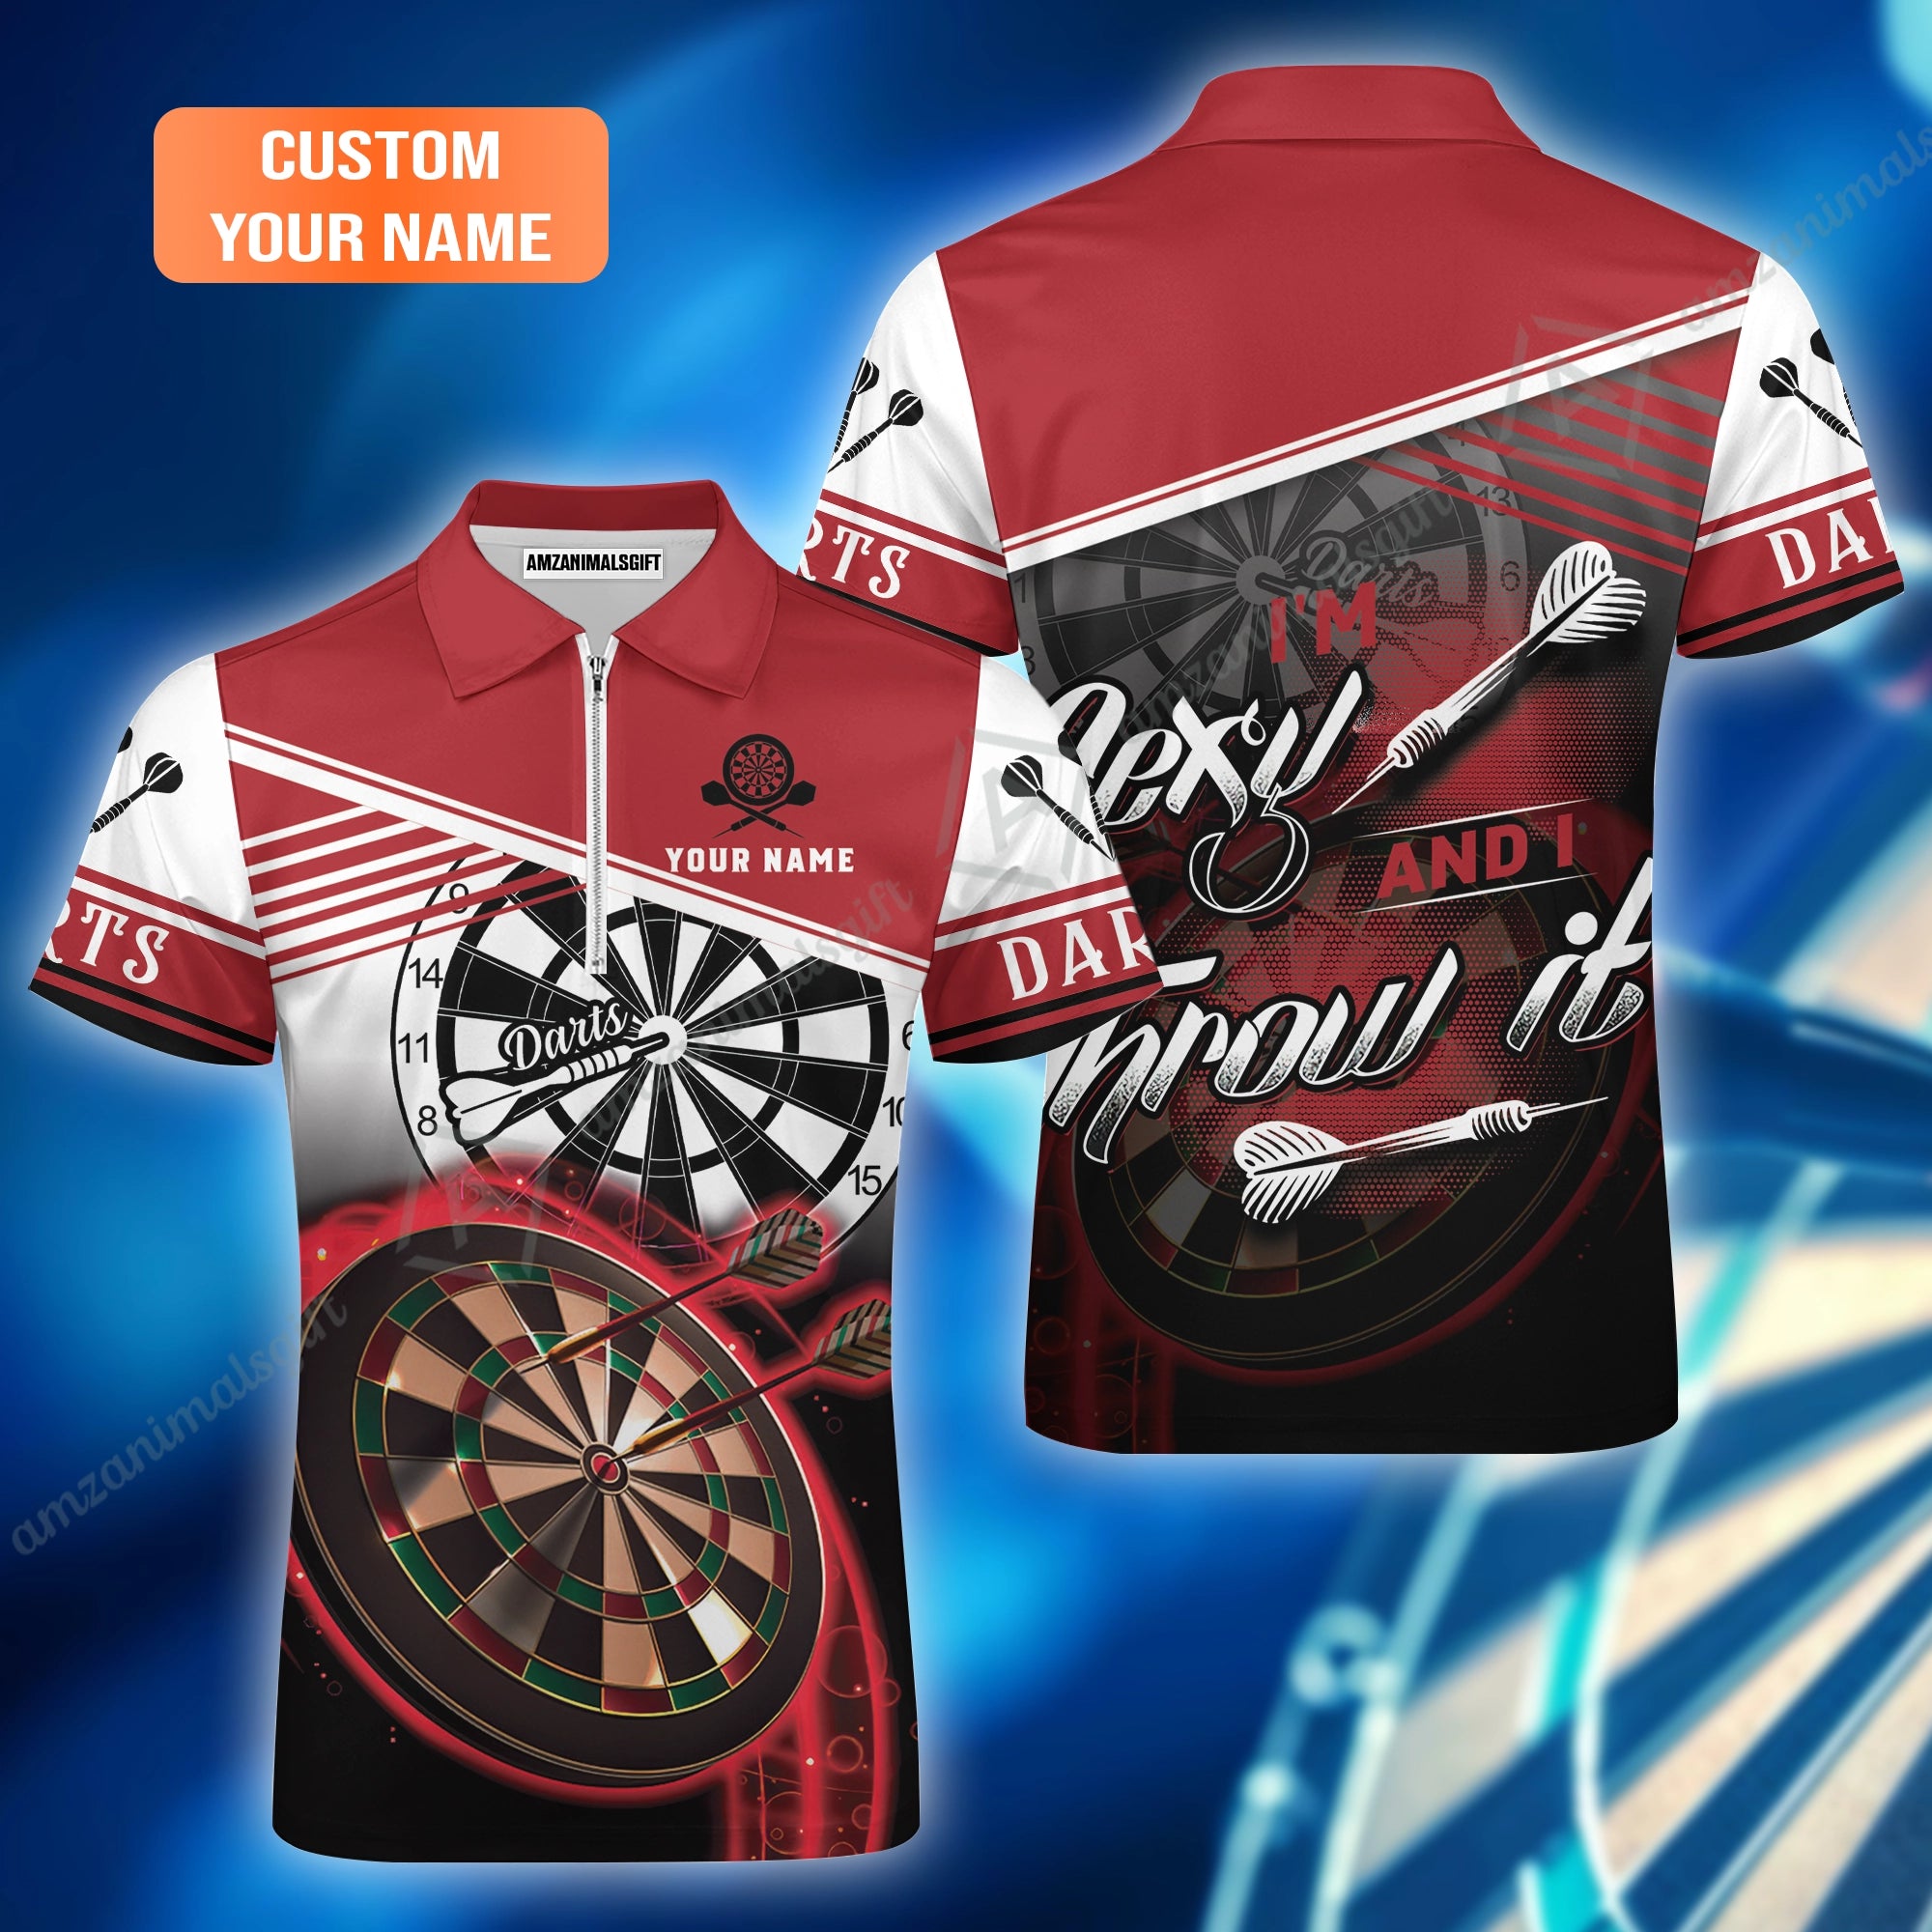 Personalized Darts Jersey, Darts Red Color Custom Quarter-Zip Polo Shirt I'm Sexy And I Throw It, Outfits For Darts Players, Darts Team